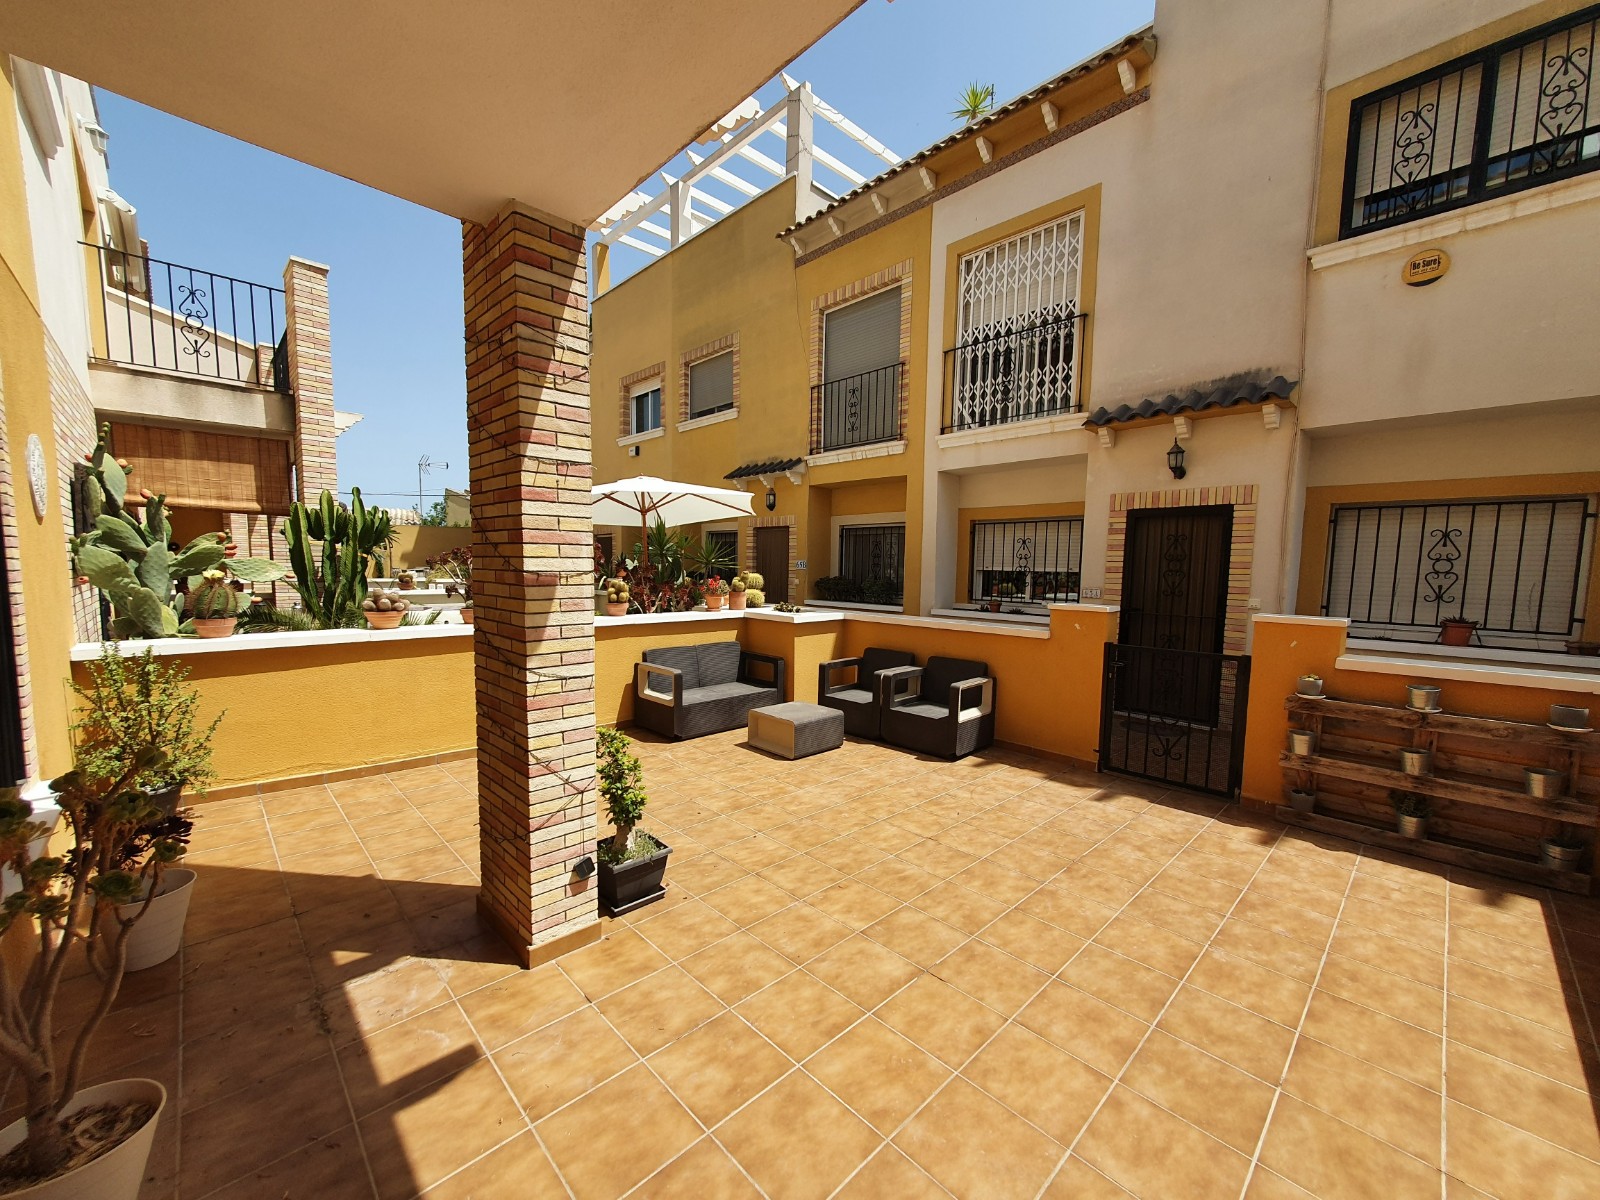 For sale: 2 bedroom apartment / flat in Catral, Costa Blanca